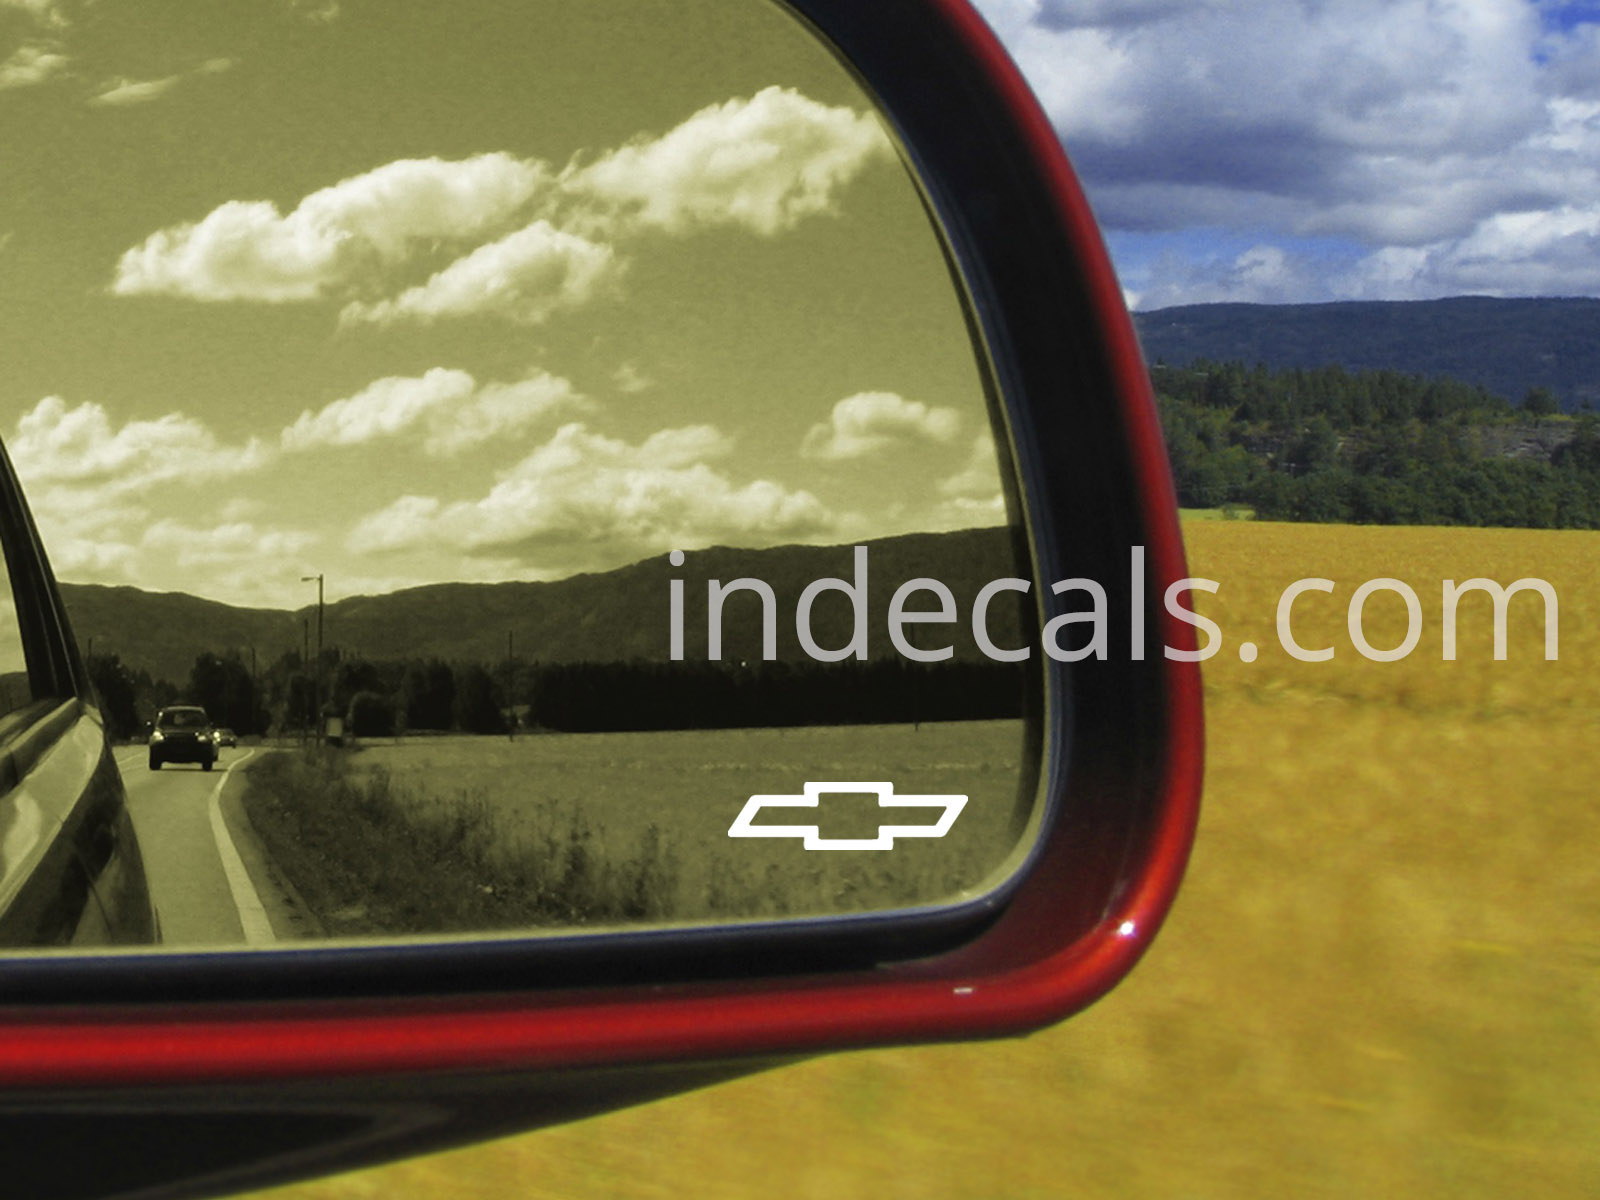 3 x Chevrolet Stickers for Mirror Glass - White